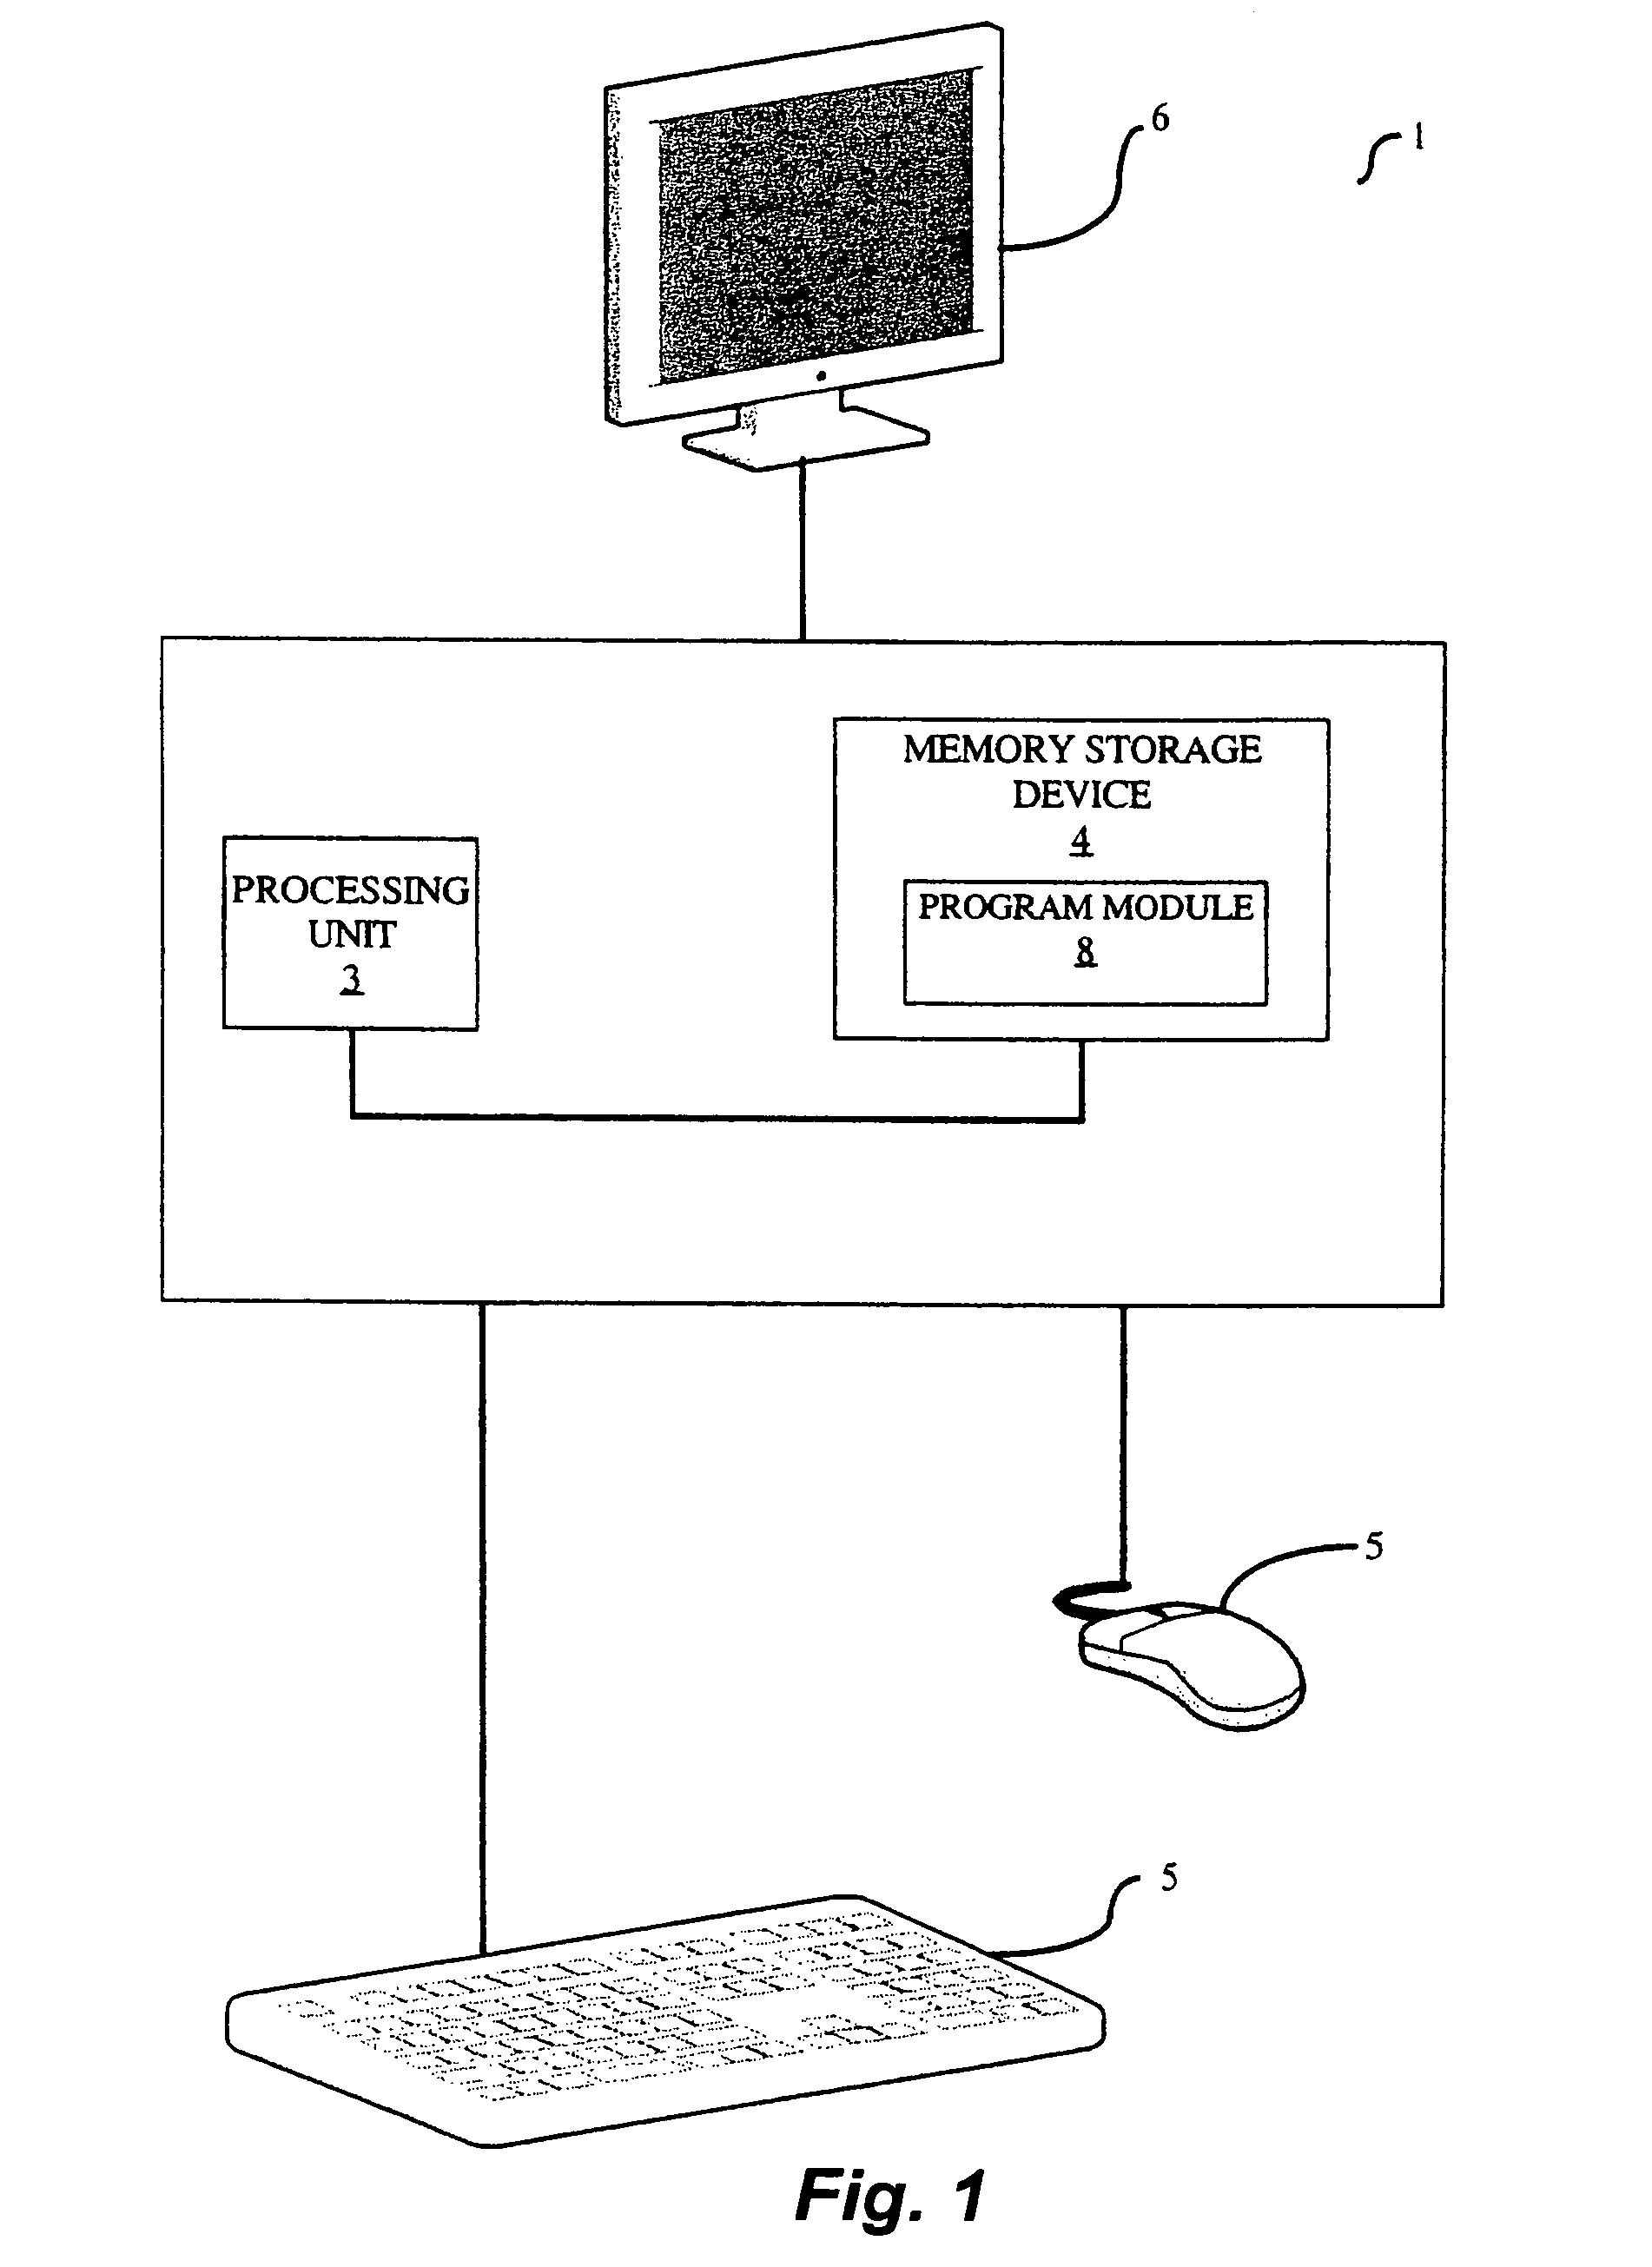 Method and apparatus for construction and use of concept knowledge base